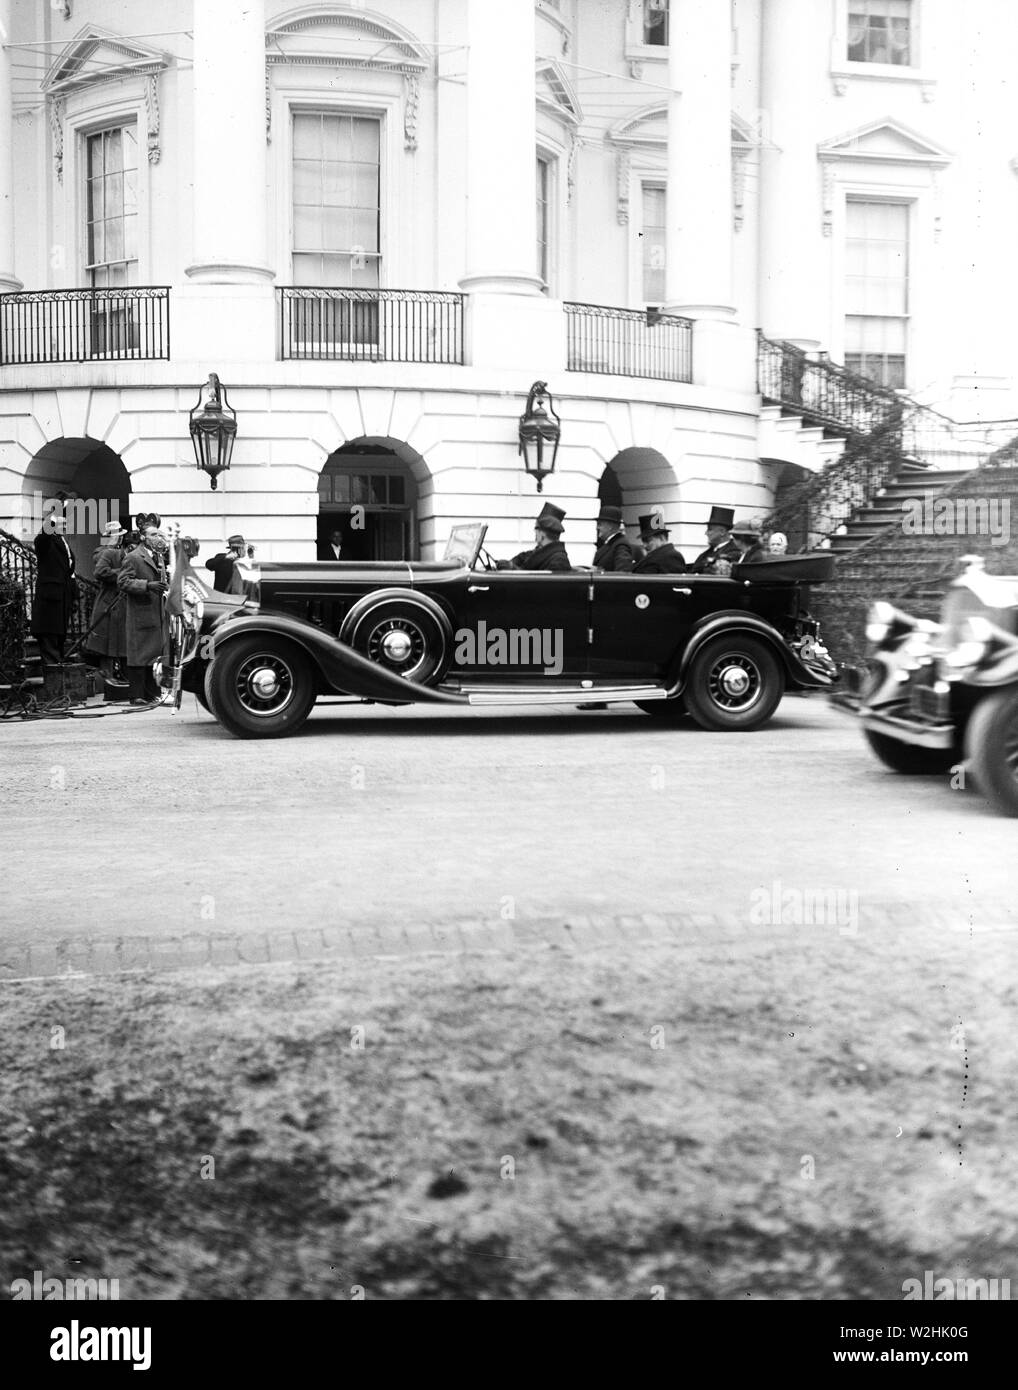 Franklin D. Roosevelt - Franklin D. Roosevelt inauguration. Automobile with Roosevelts at White House, Washington, D.C. March 4, 1933 Stock Photo